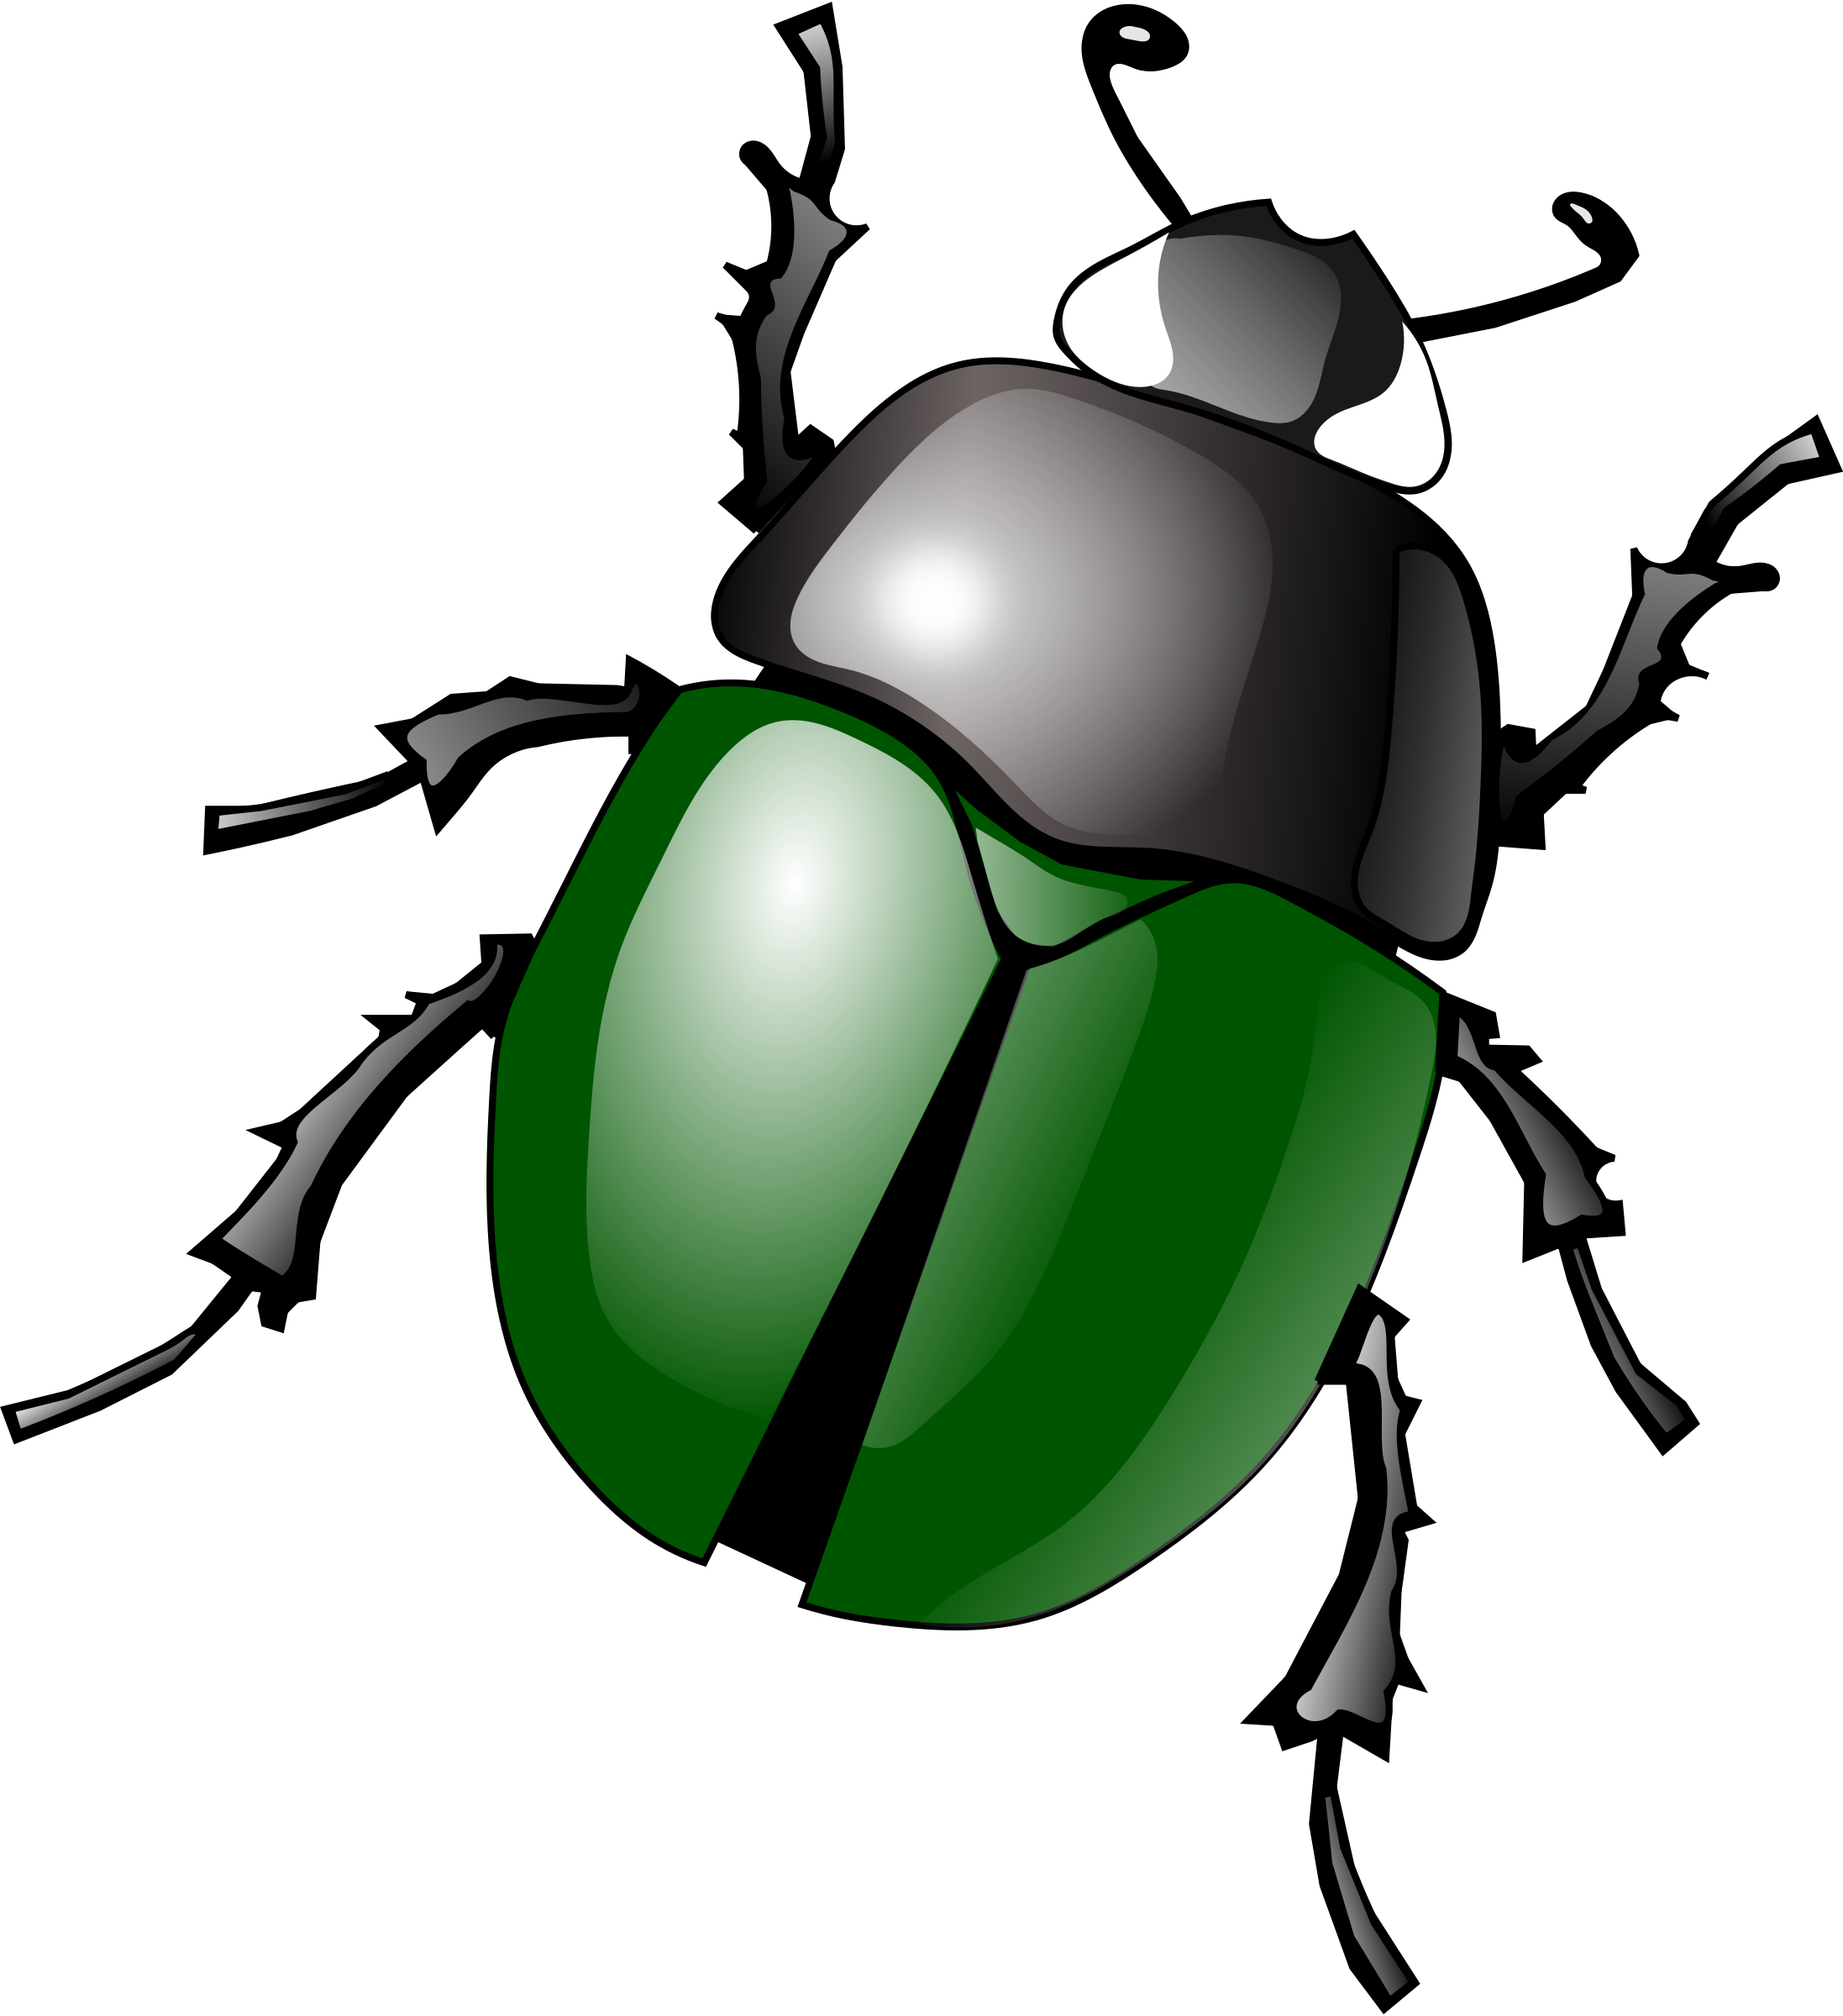 Insect clipart free images 3 - Insect Clipart